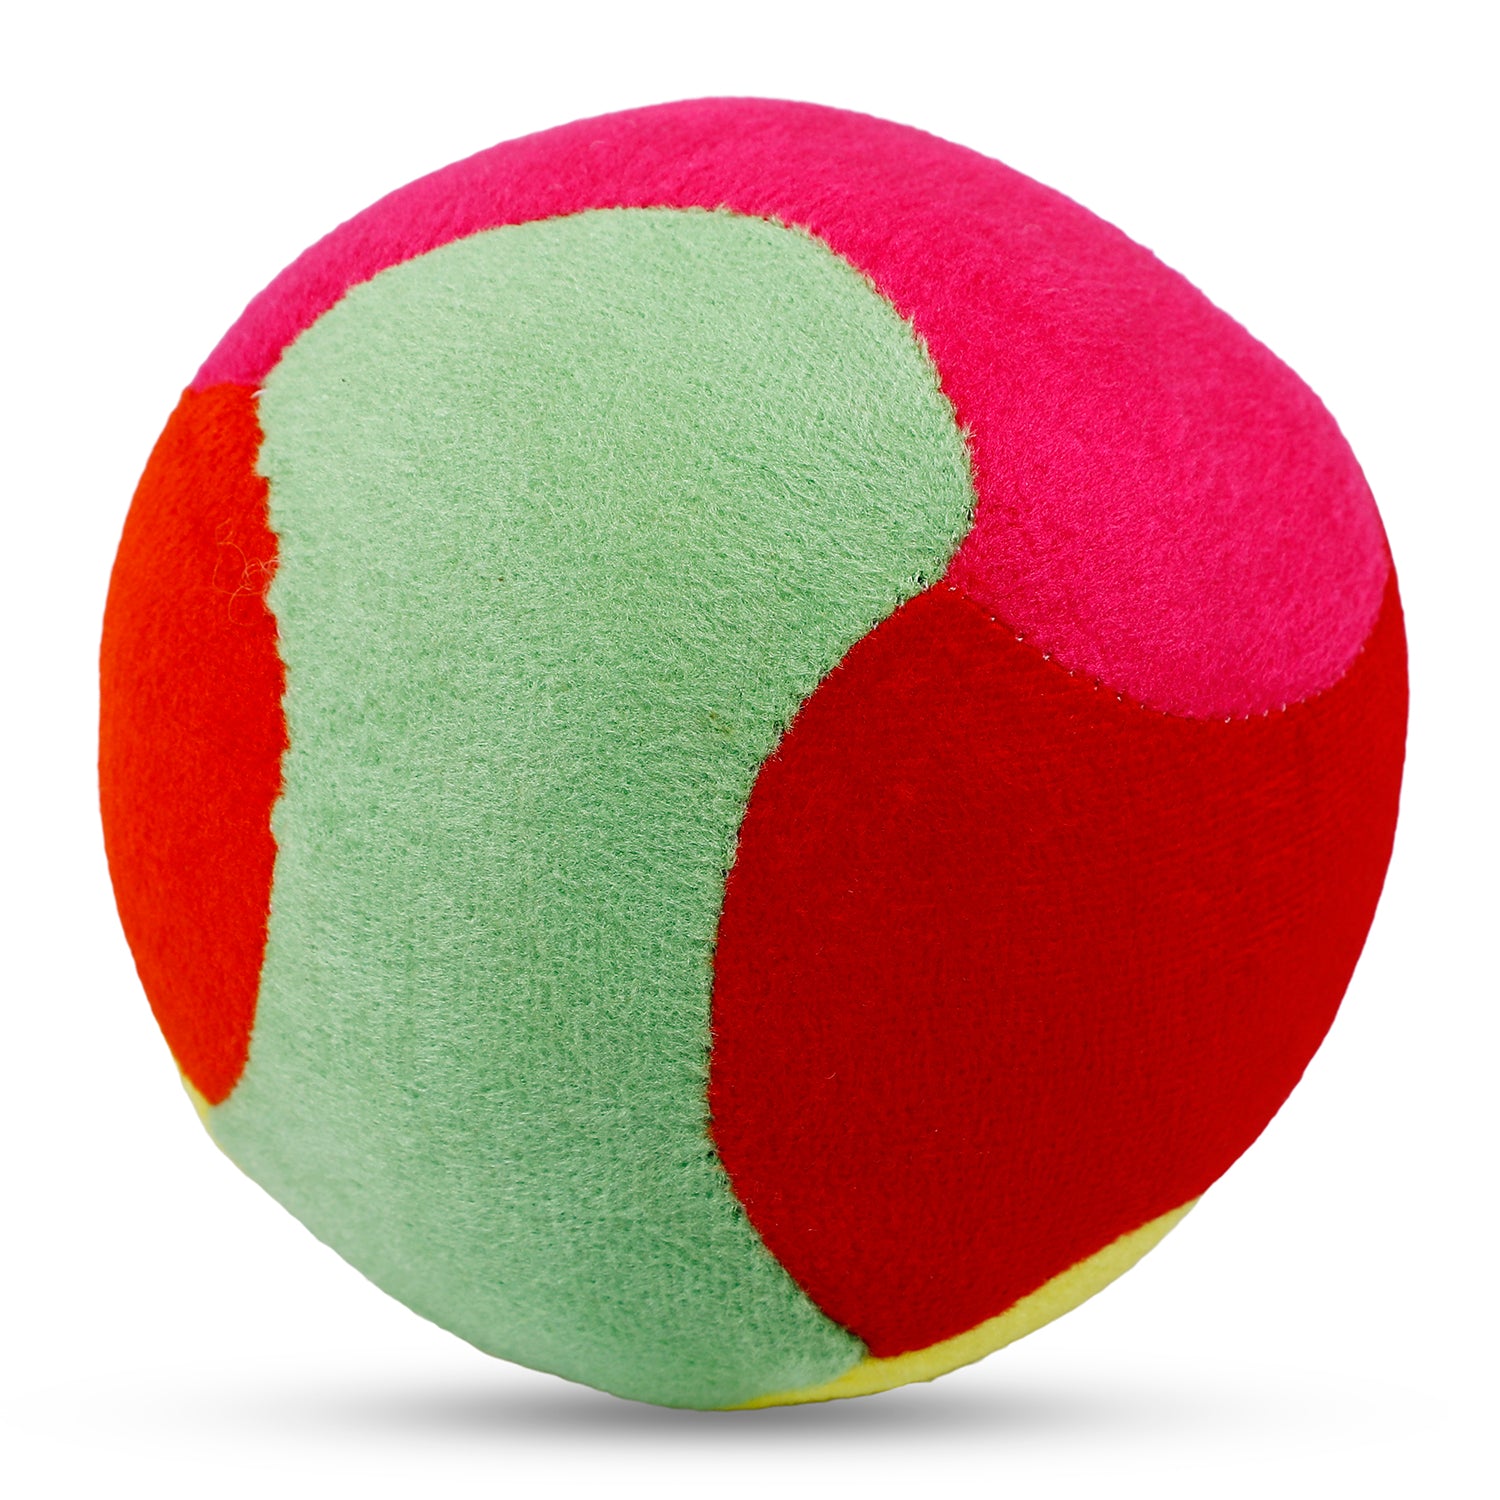 Baby Moo Playtime Fun Infant And Toddler Soft Plush Fabric Rattle Ball - Multicolor